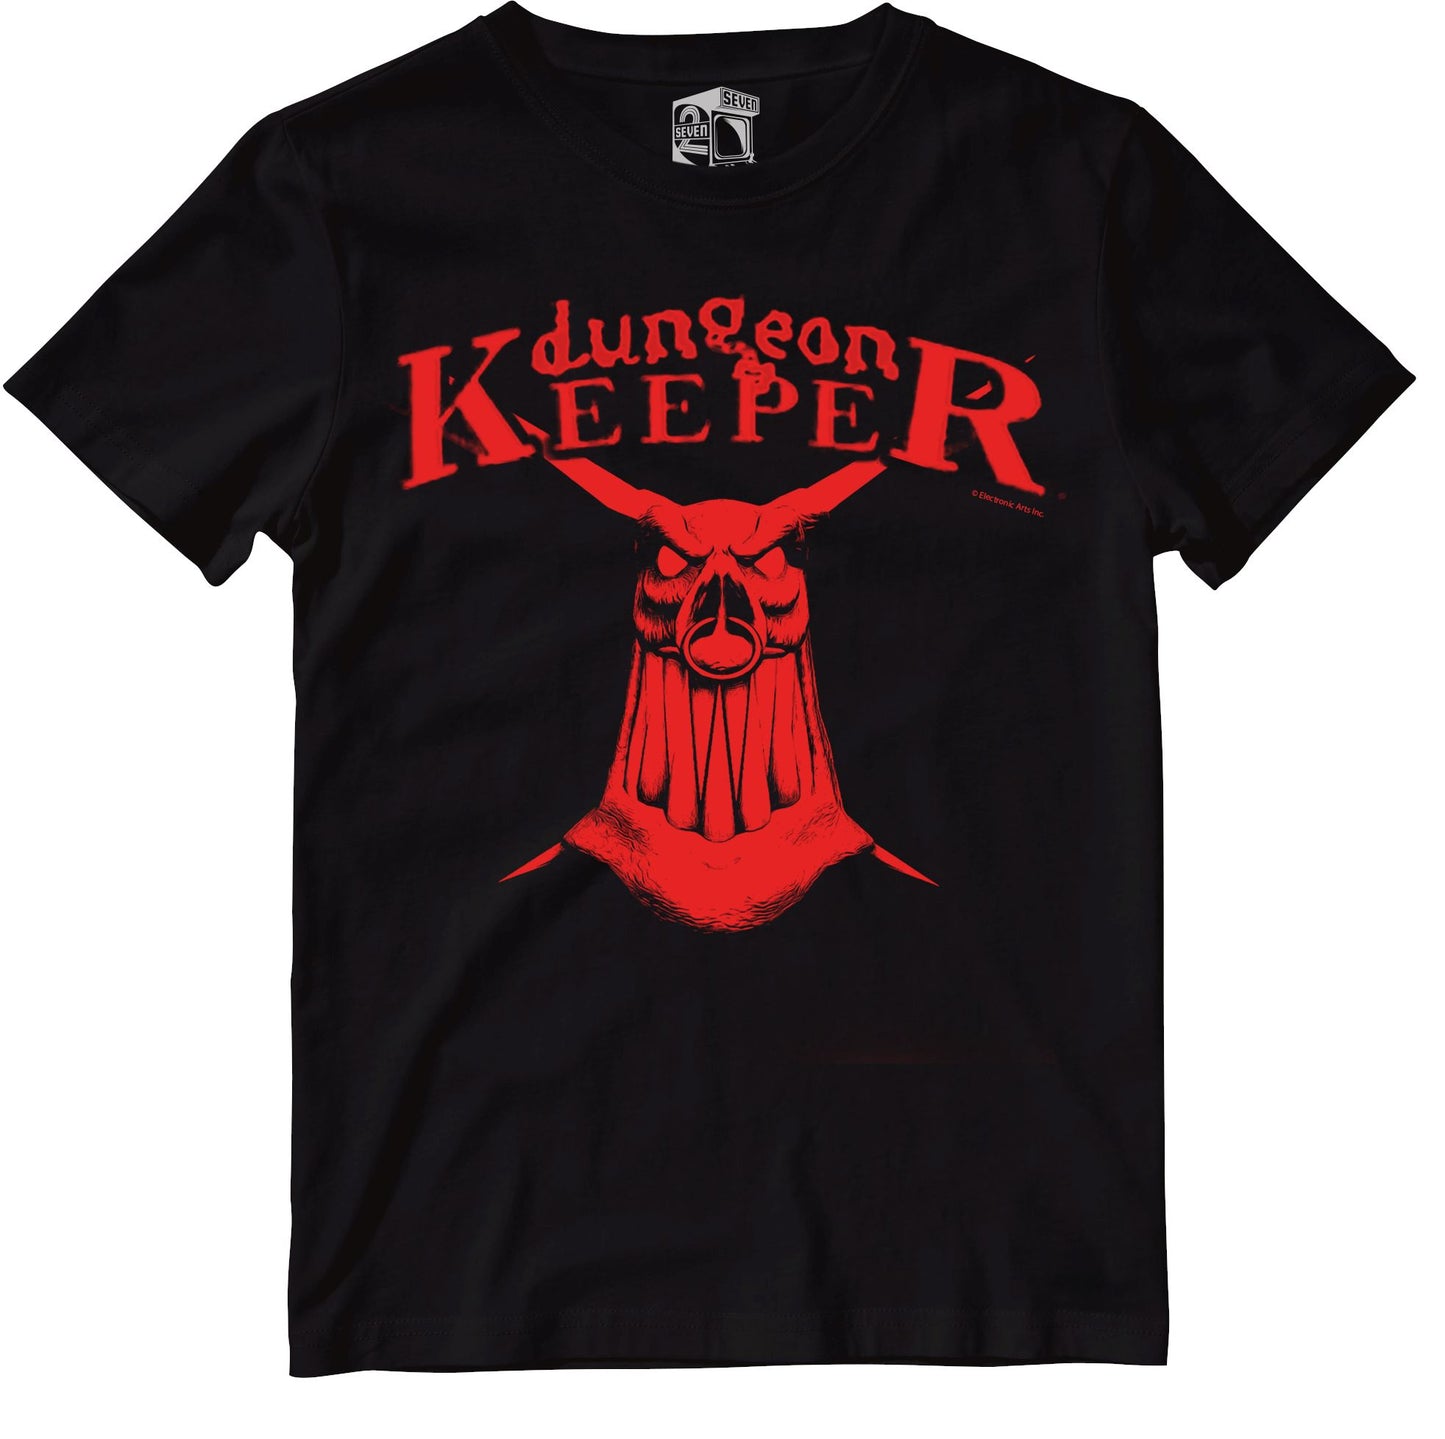 Dungeon Keeper Retro Gaming T-Shirt SIOW Edition T-Shirt Seven Squared 